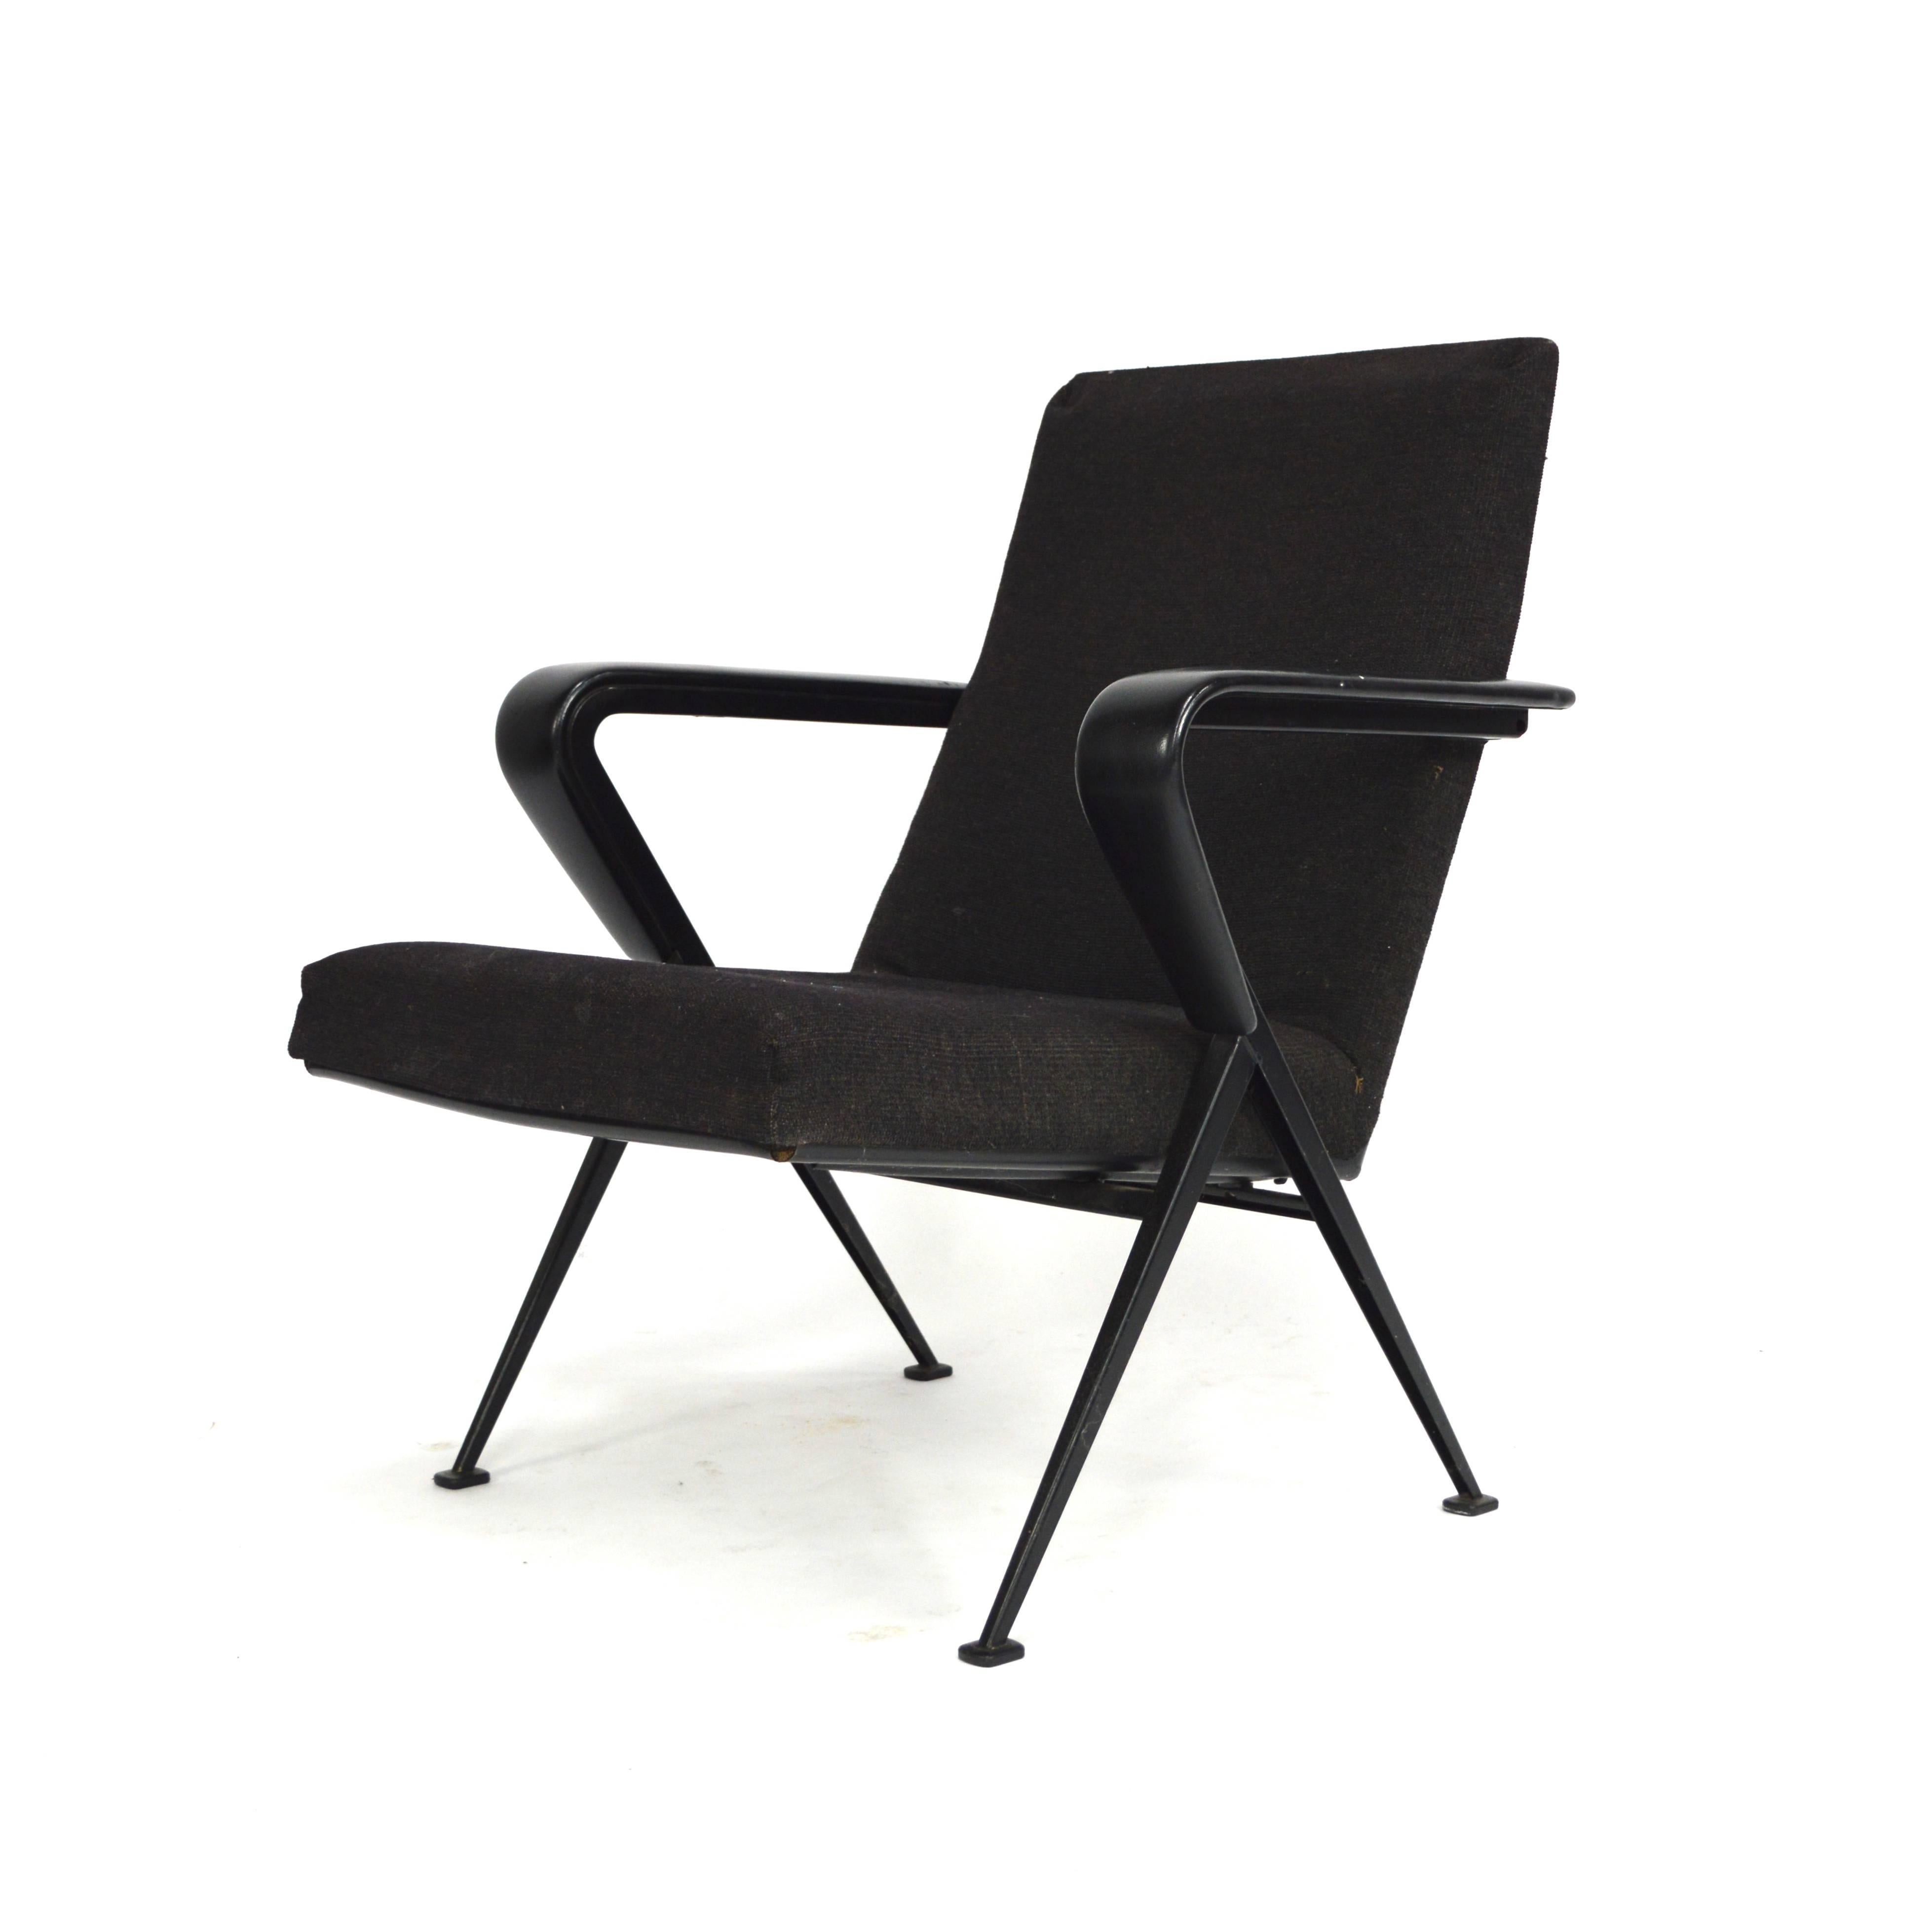 Repose chair by Friso Kramer from January 1966.

The Repose lounge chair won the prestigious Signe d'Or award when it was presented in 1960.
This chair will look and sit best reupholstered. Our suggestion is beautiful fabric by De Ploeg, Kvadrat